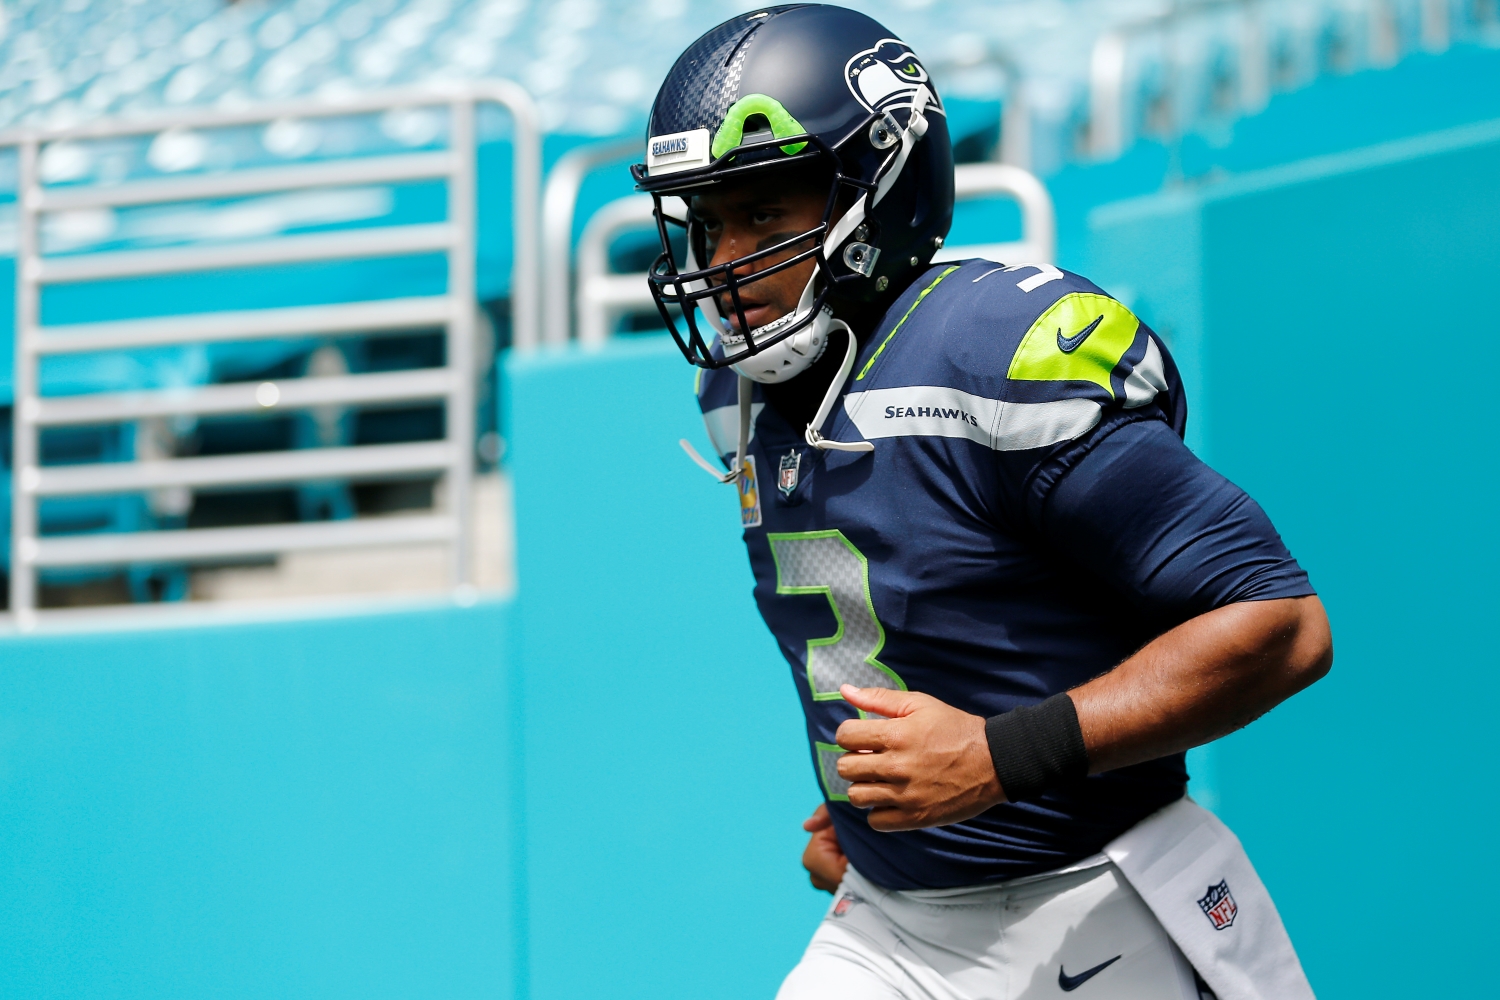 Russell Wilson of the Seattle Seahawks takes the field prior to the game against the Miami Dolphins.